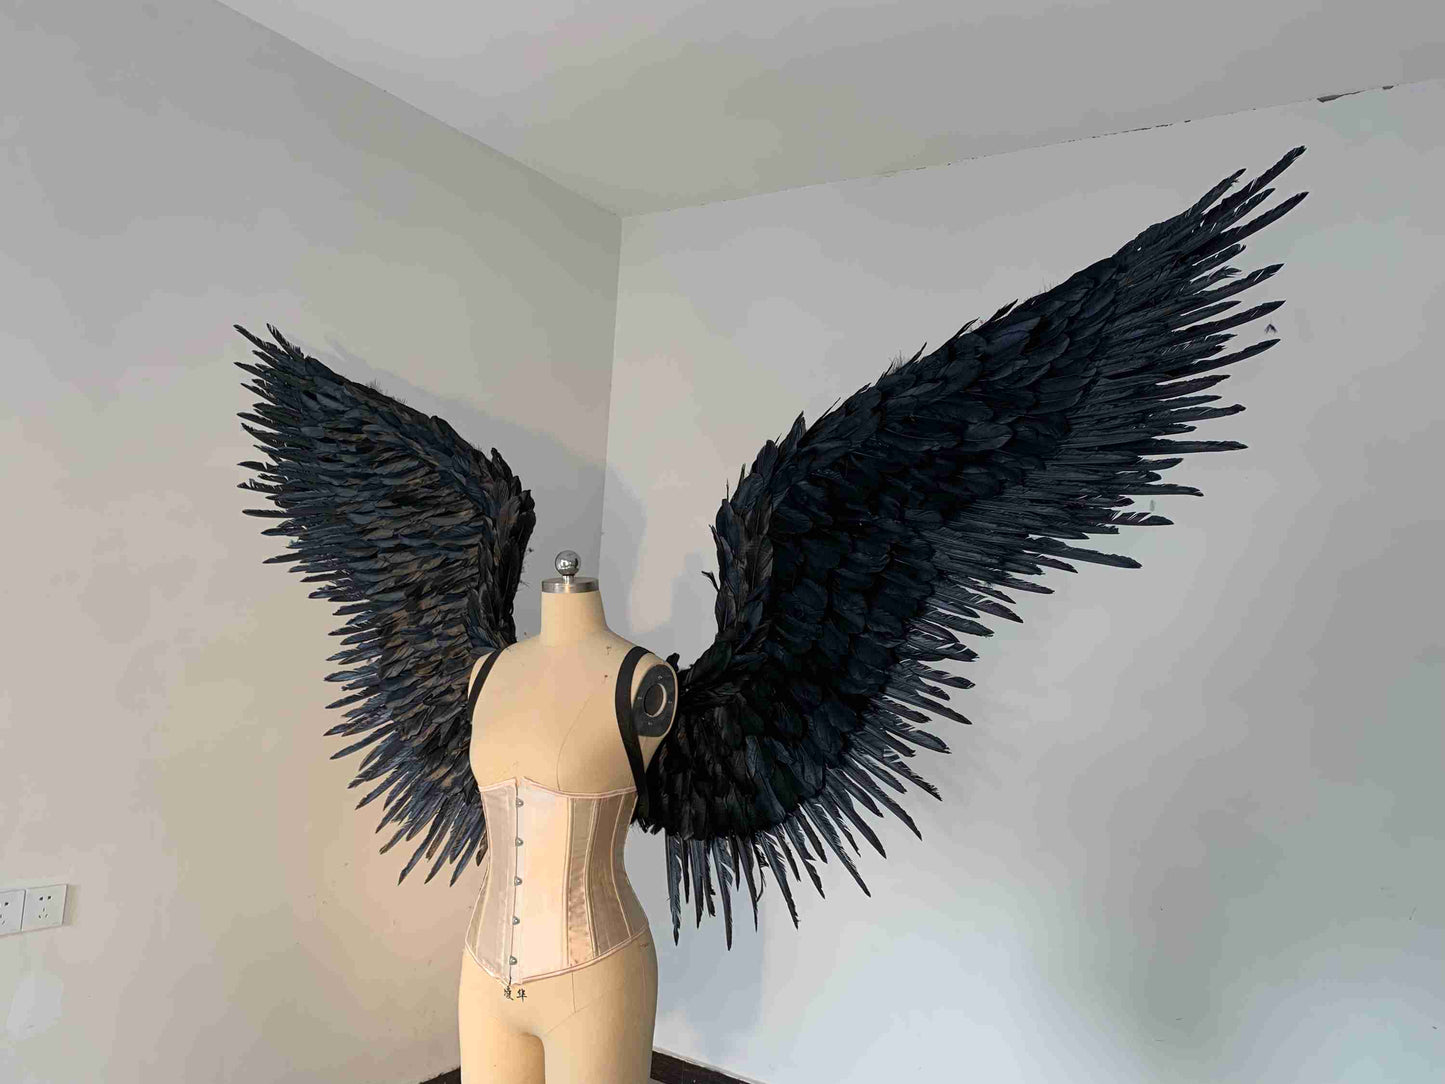 Our black color angel wings from the left side. Made from goose feathers. Wings for angel costume or devil costume. Suitable for photoshoots.